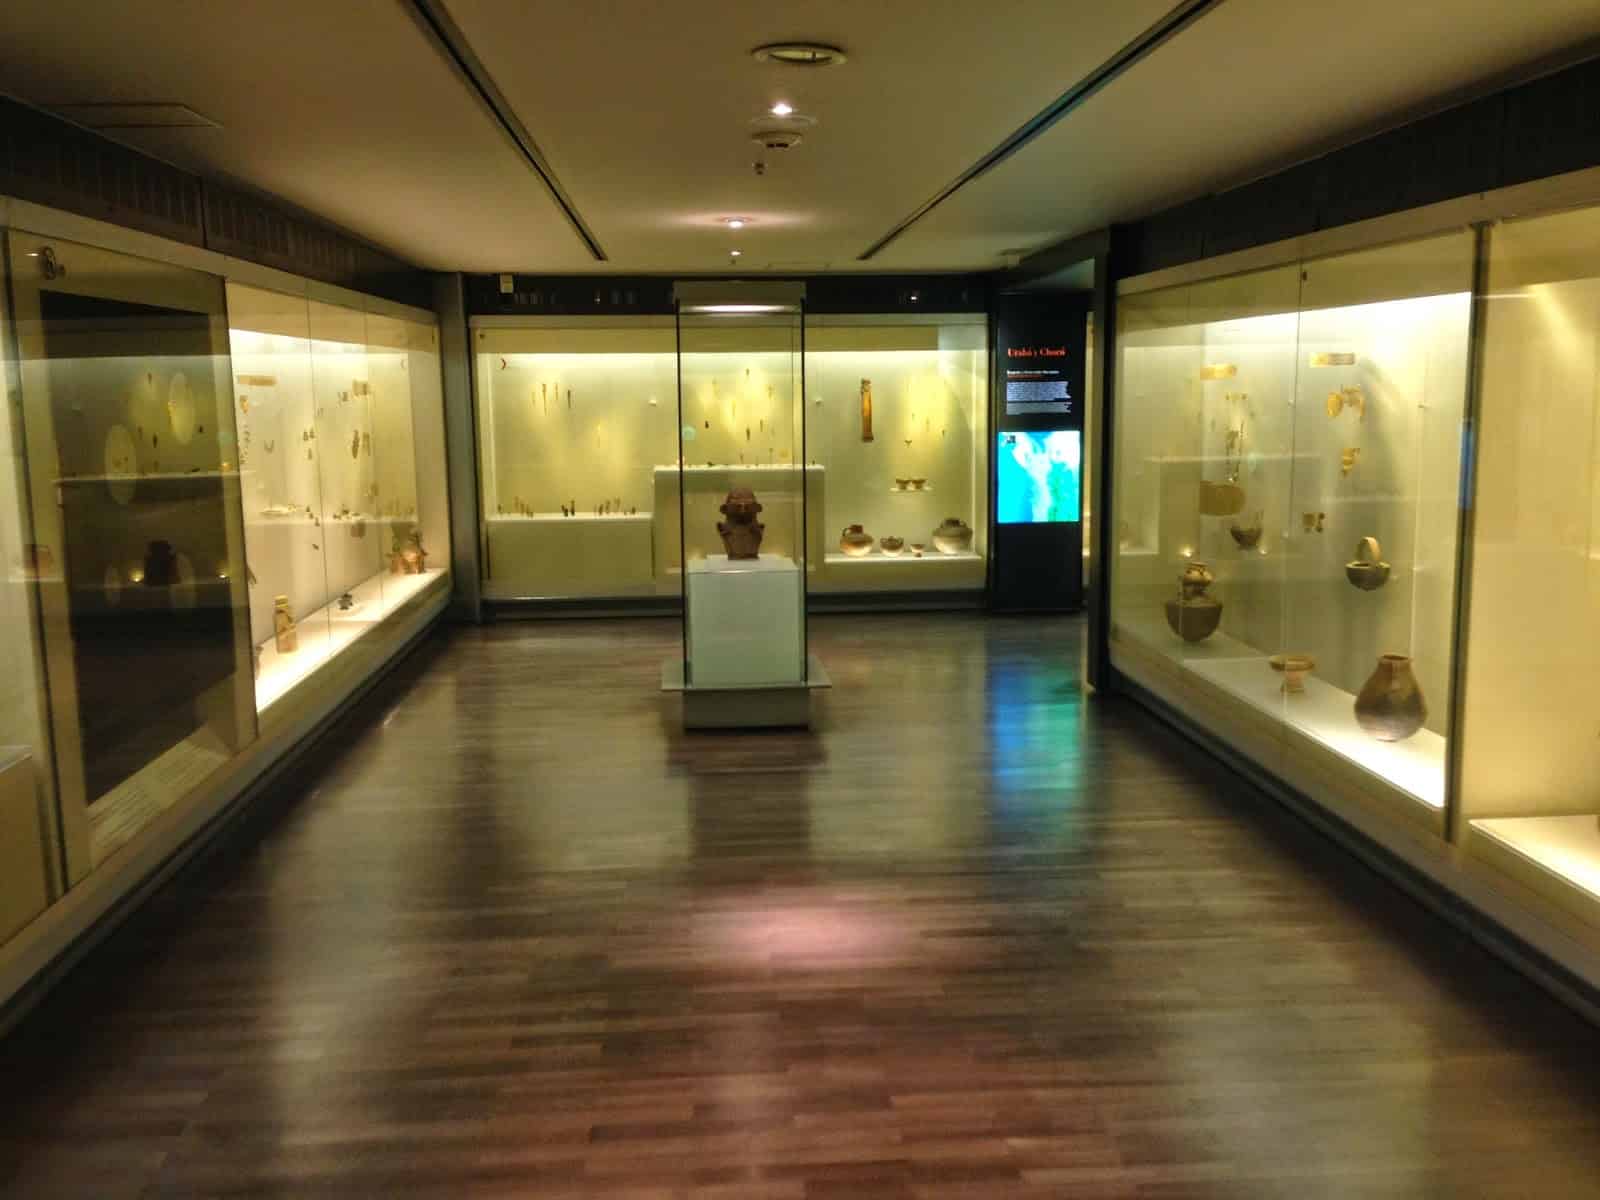 A gallery in the Gold Museum in Bogotá, Colombia